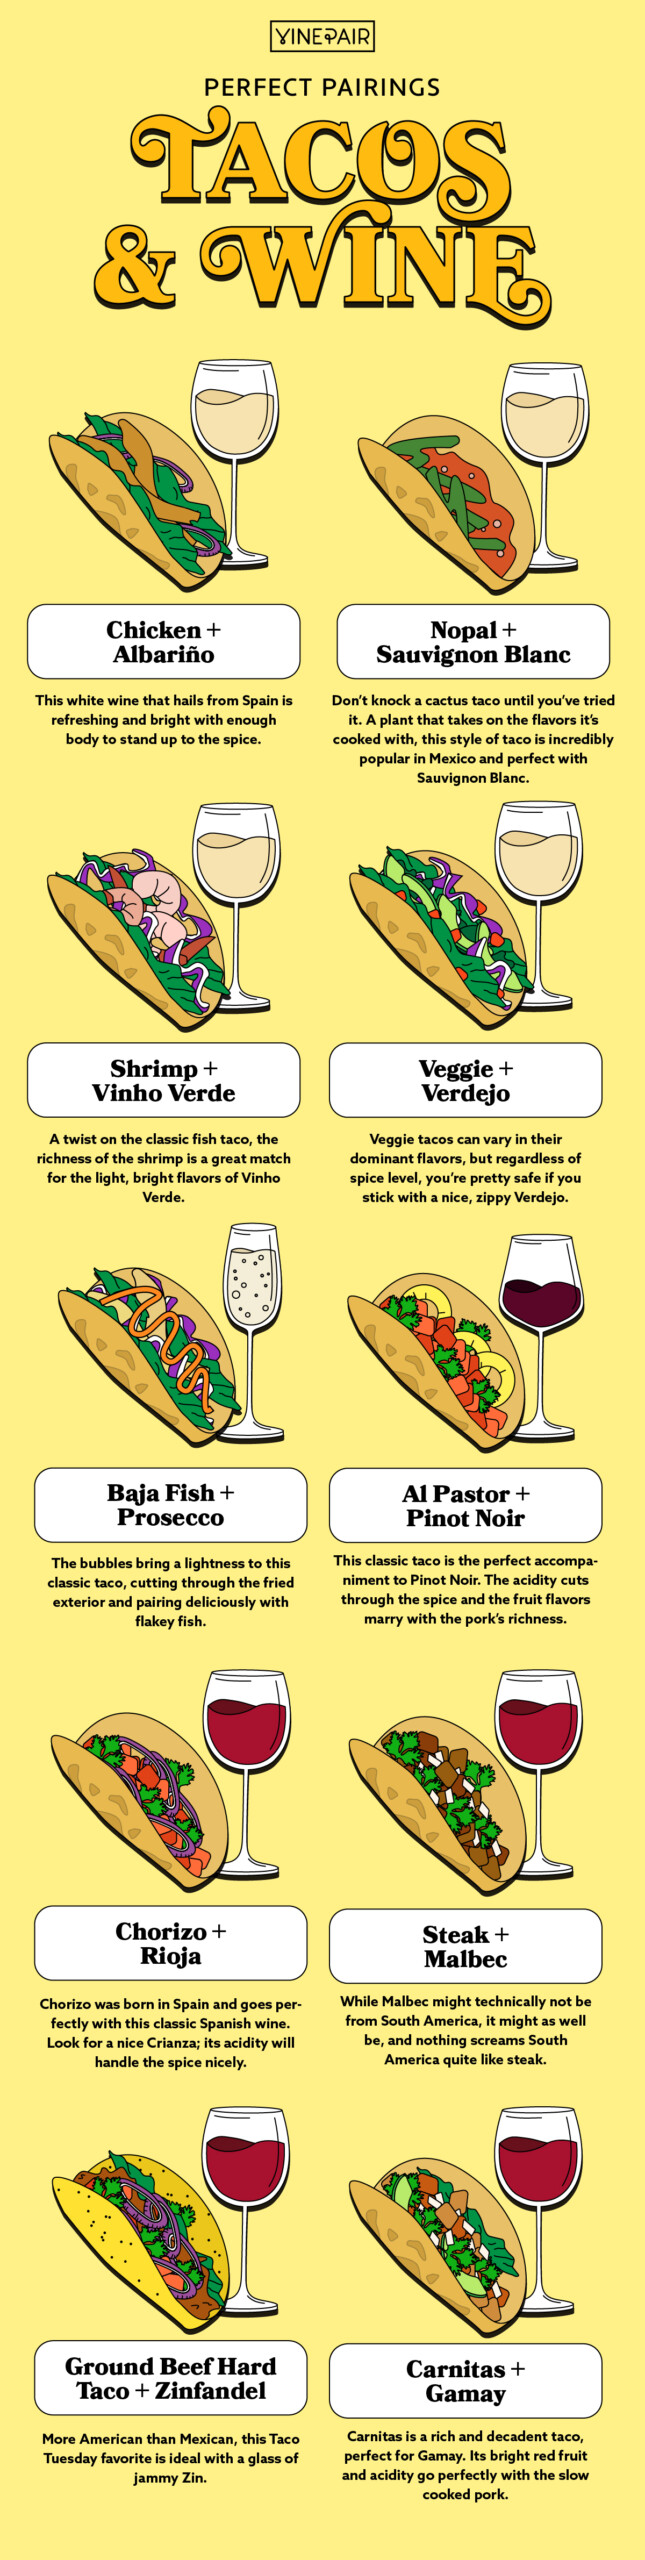 The Perfect Wine Pairing For America's Favorite Tacos [Infographic]